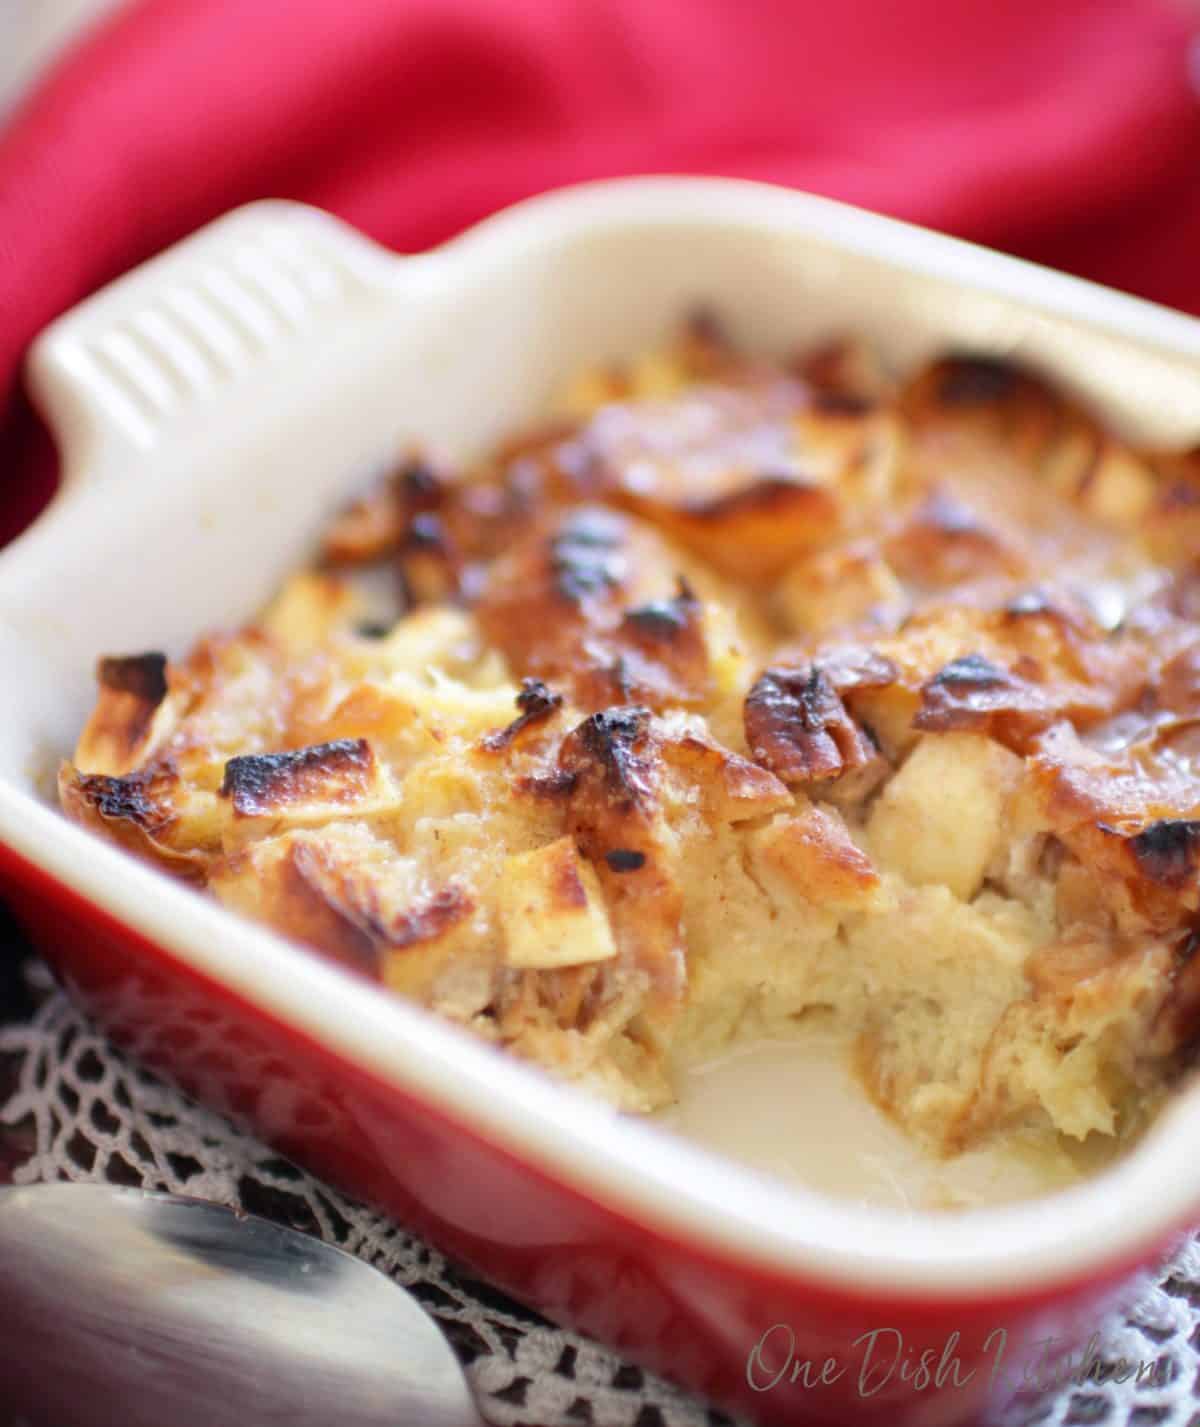 A partially eaten breakfast bread pudding made with bits of croissants on a tray.